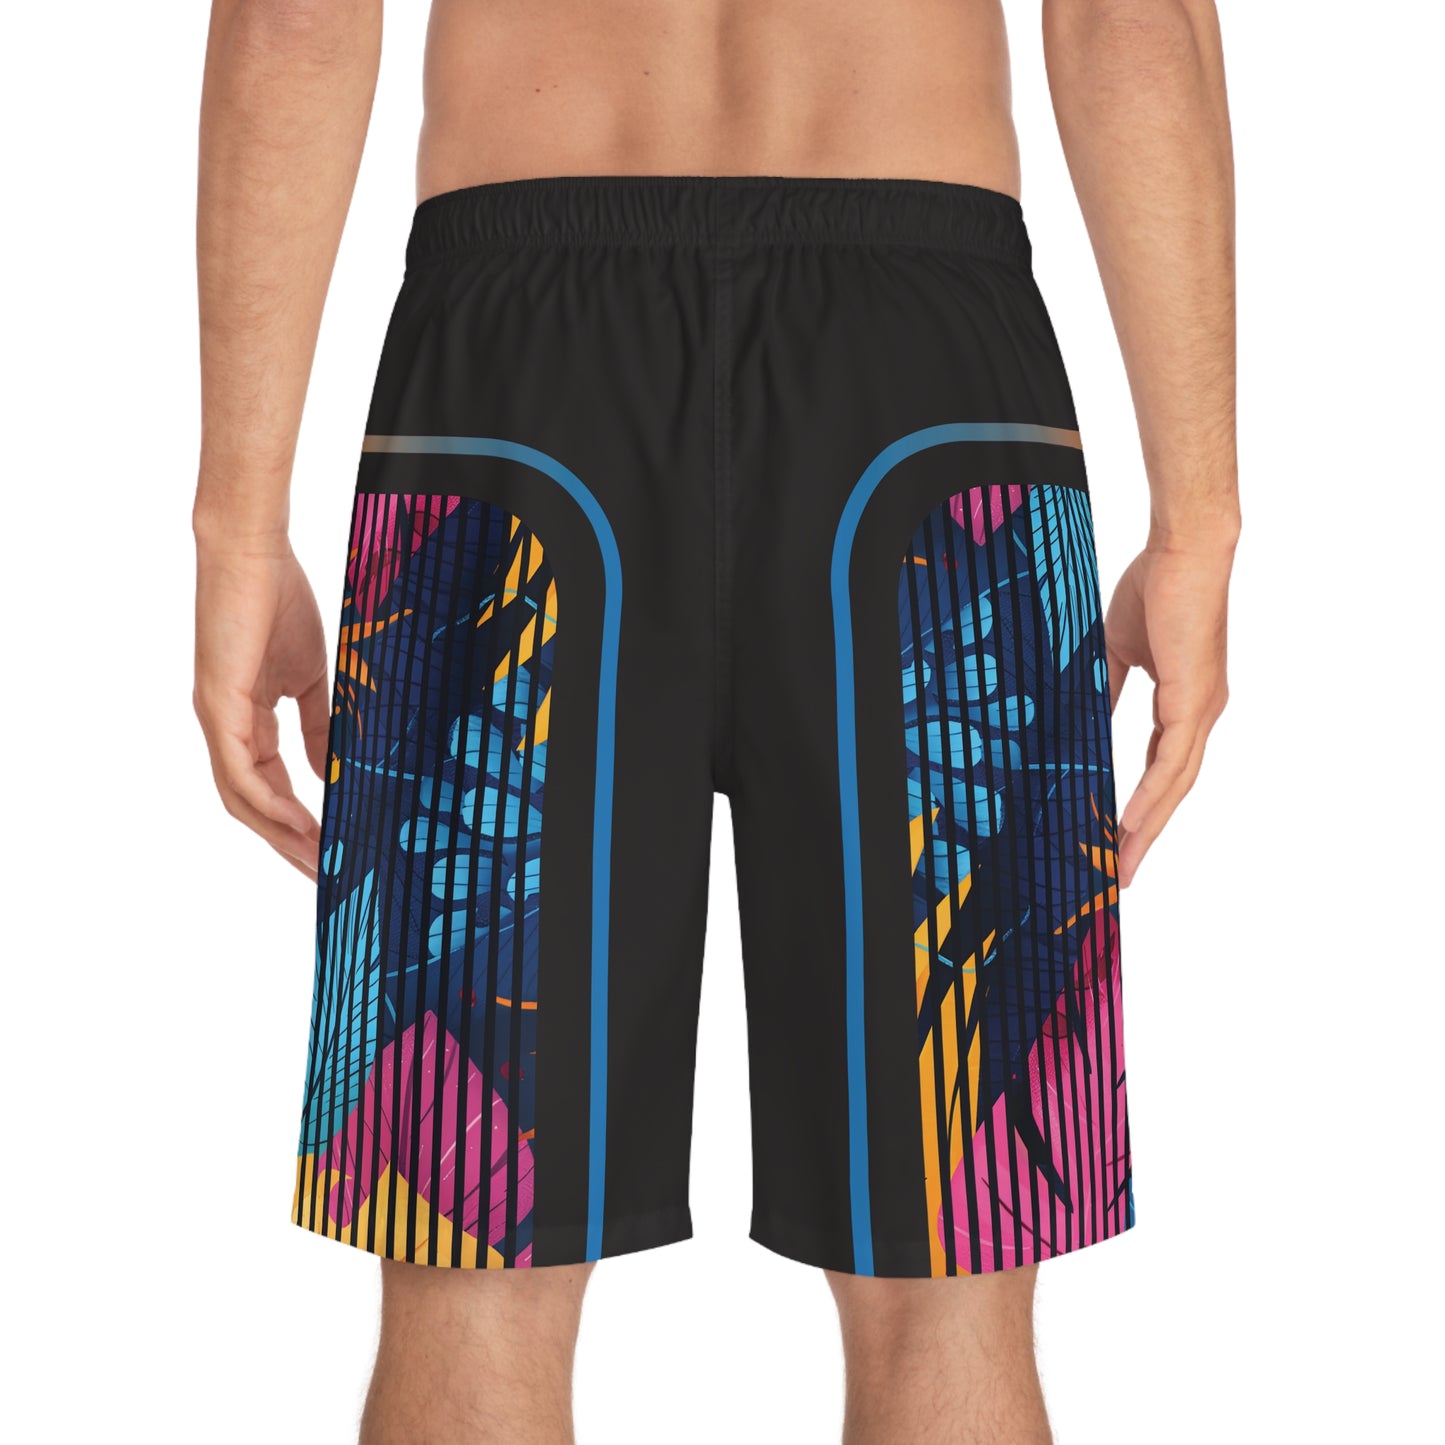 Tropical Party Board Shorts: Embrace Neon Jungle Vibes